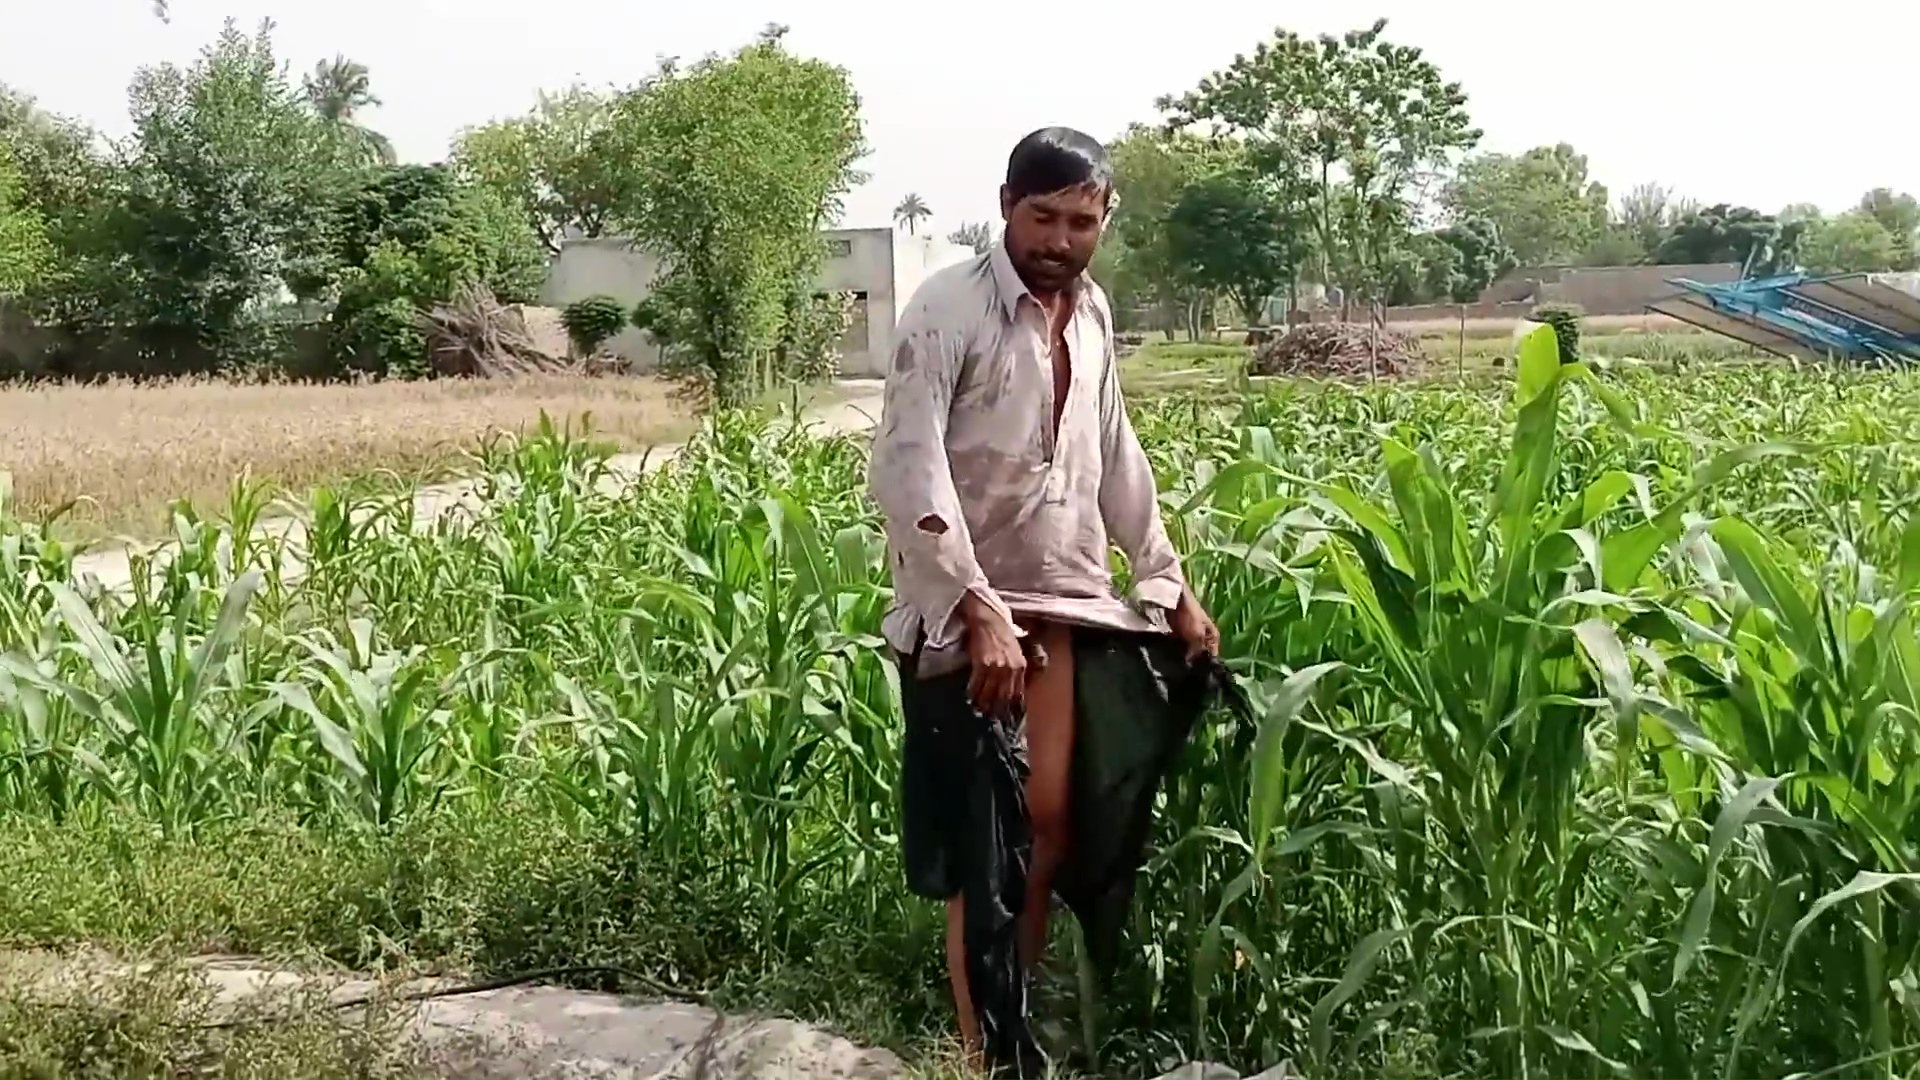 Pakistani tubewell exhibitionist flashes cock at end